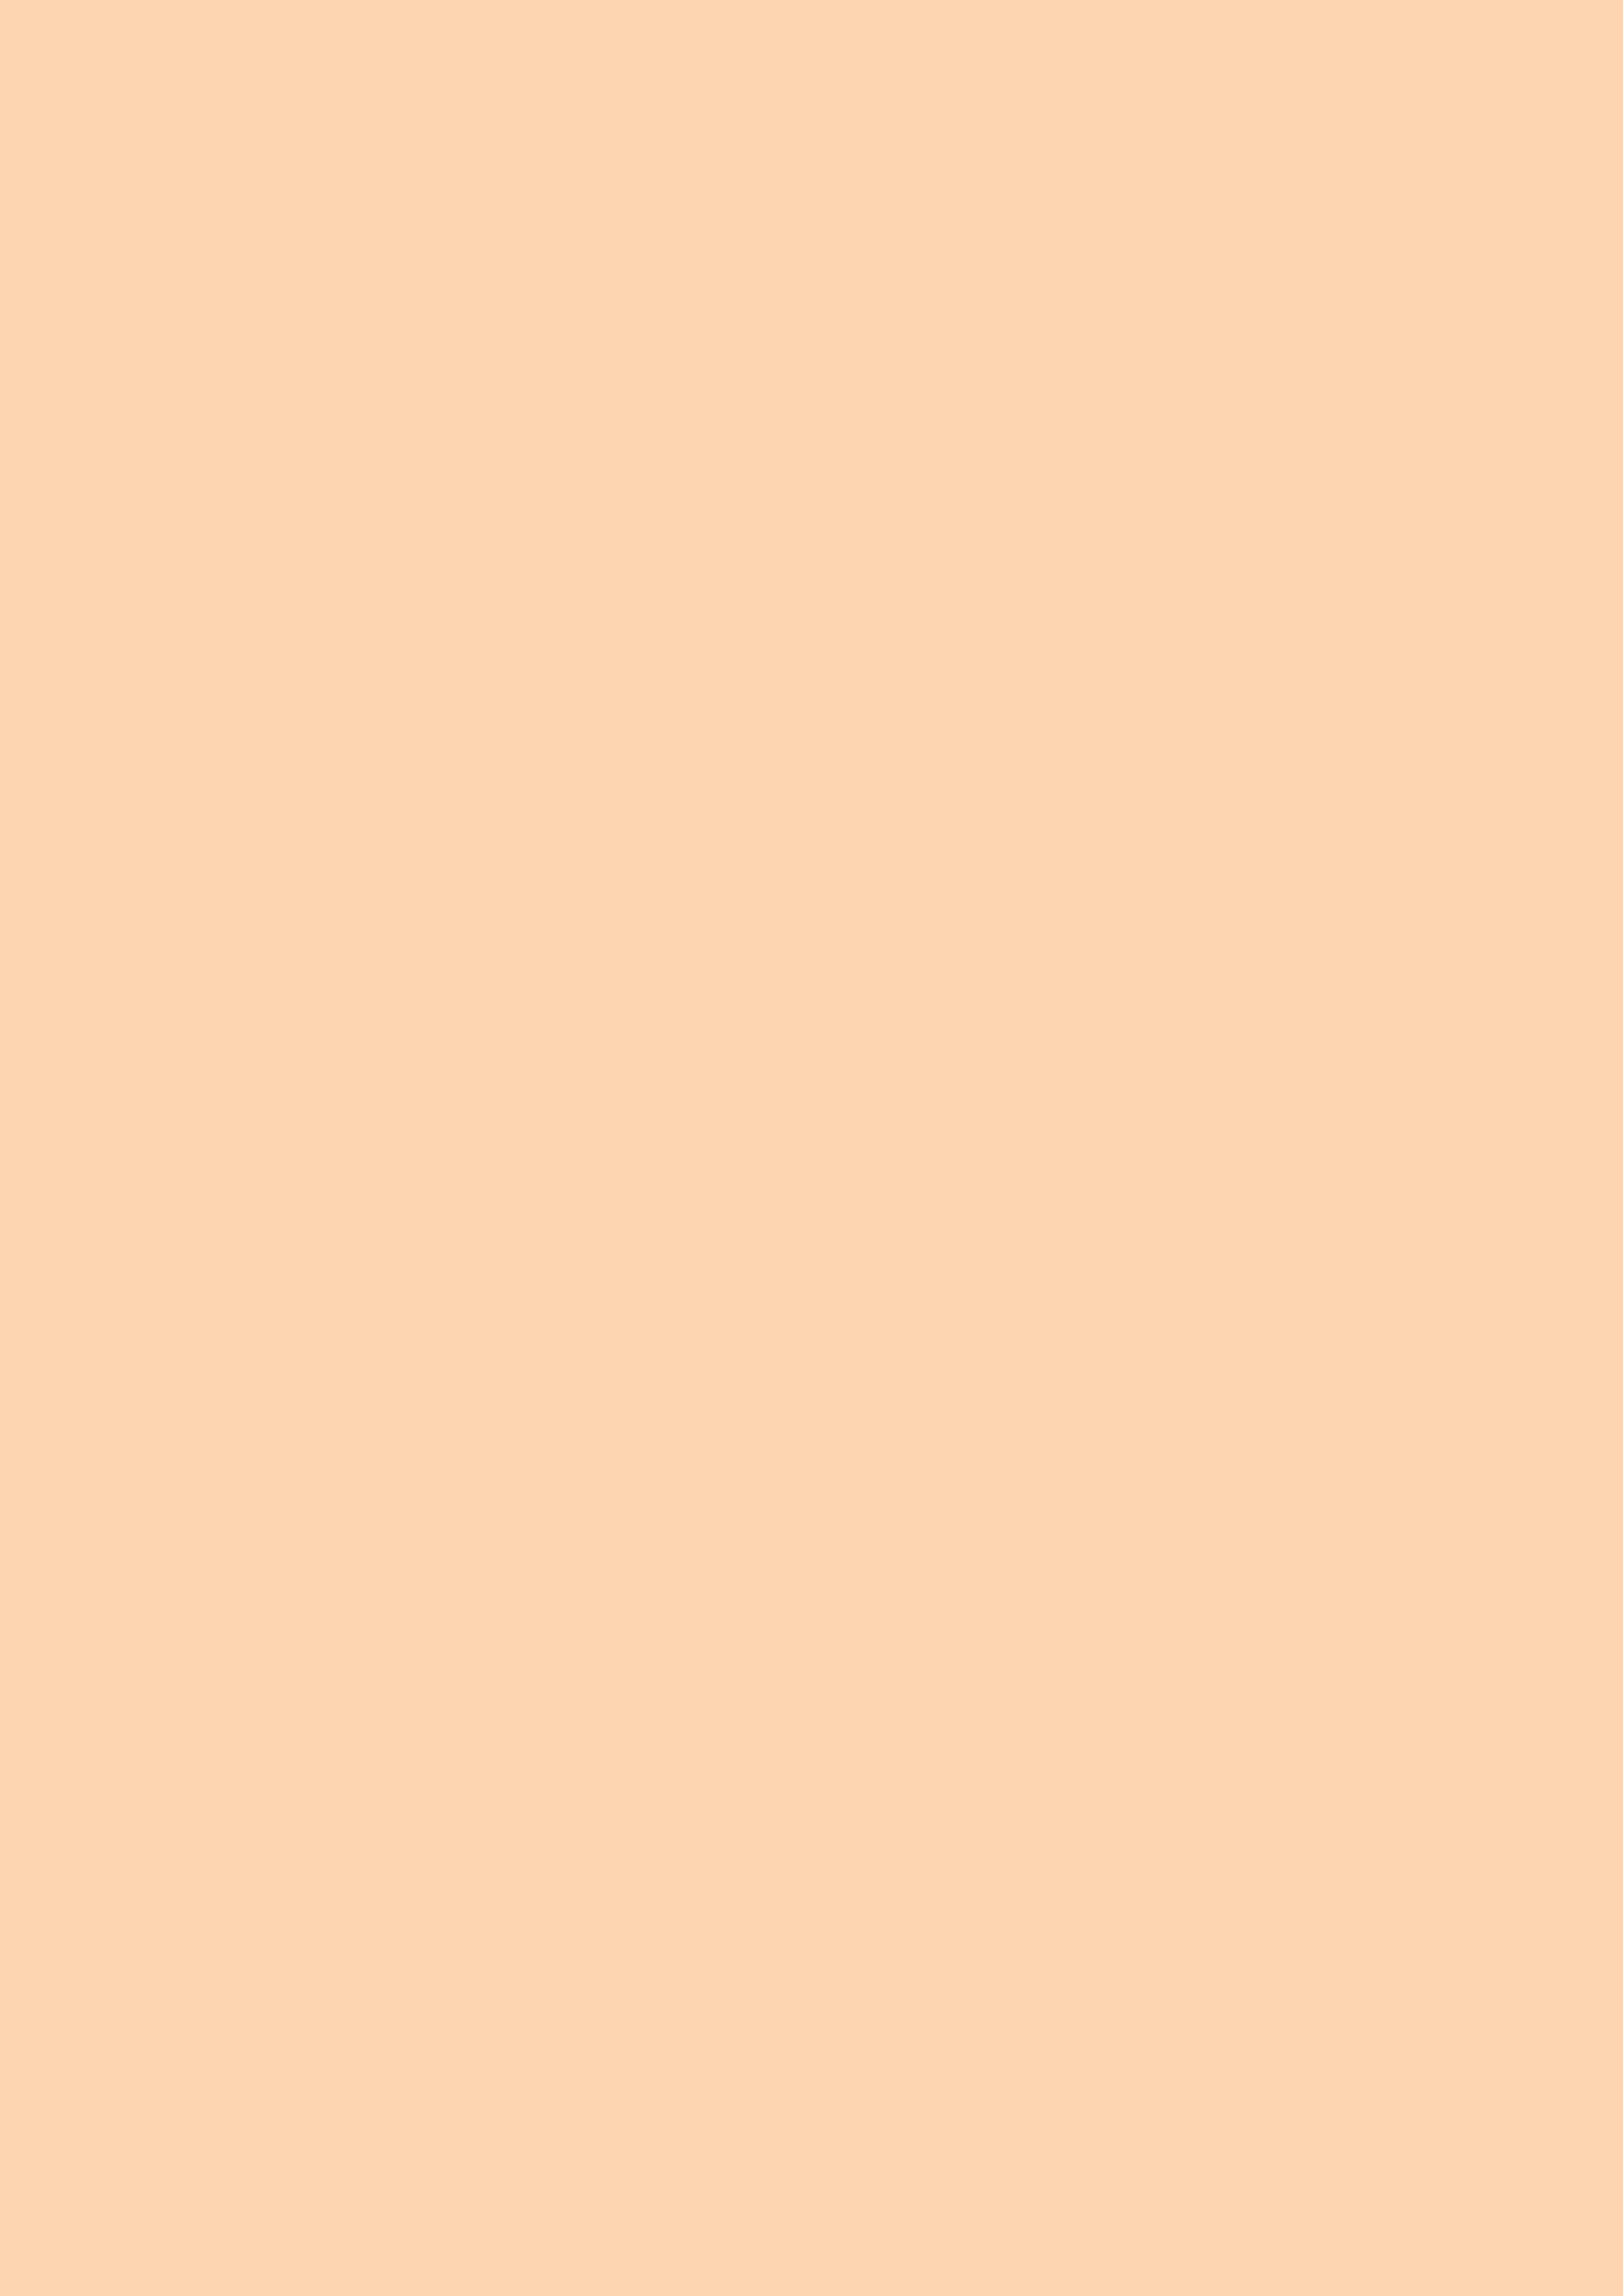 2480x3508 Light Apricot Solid Color Background